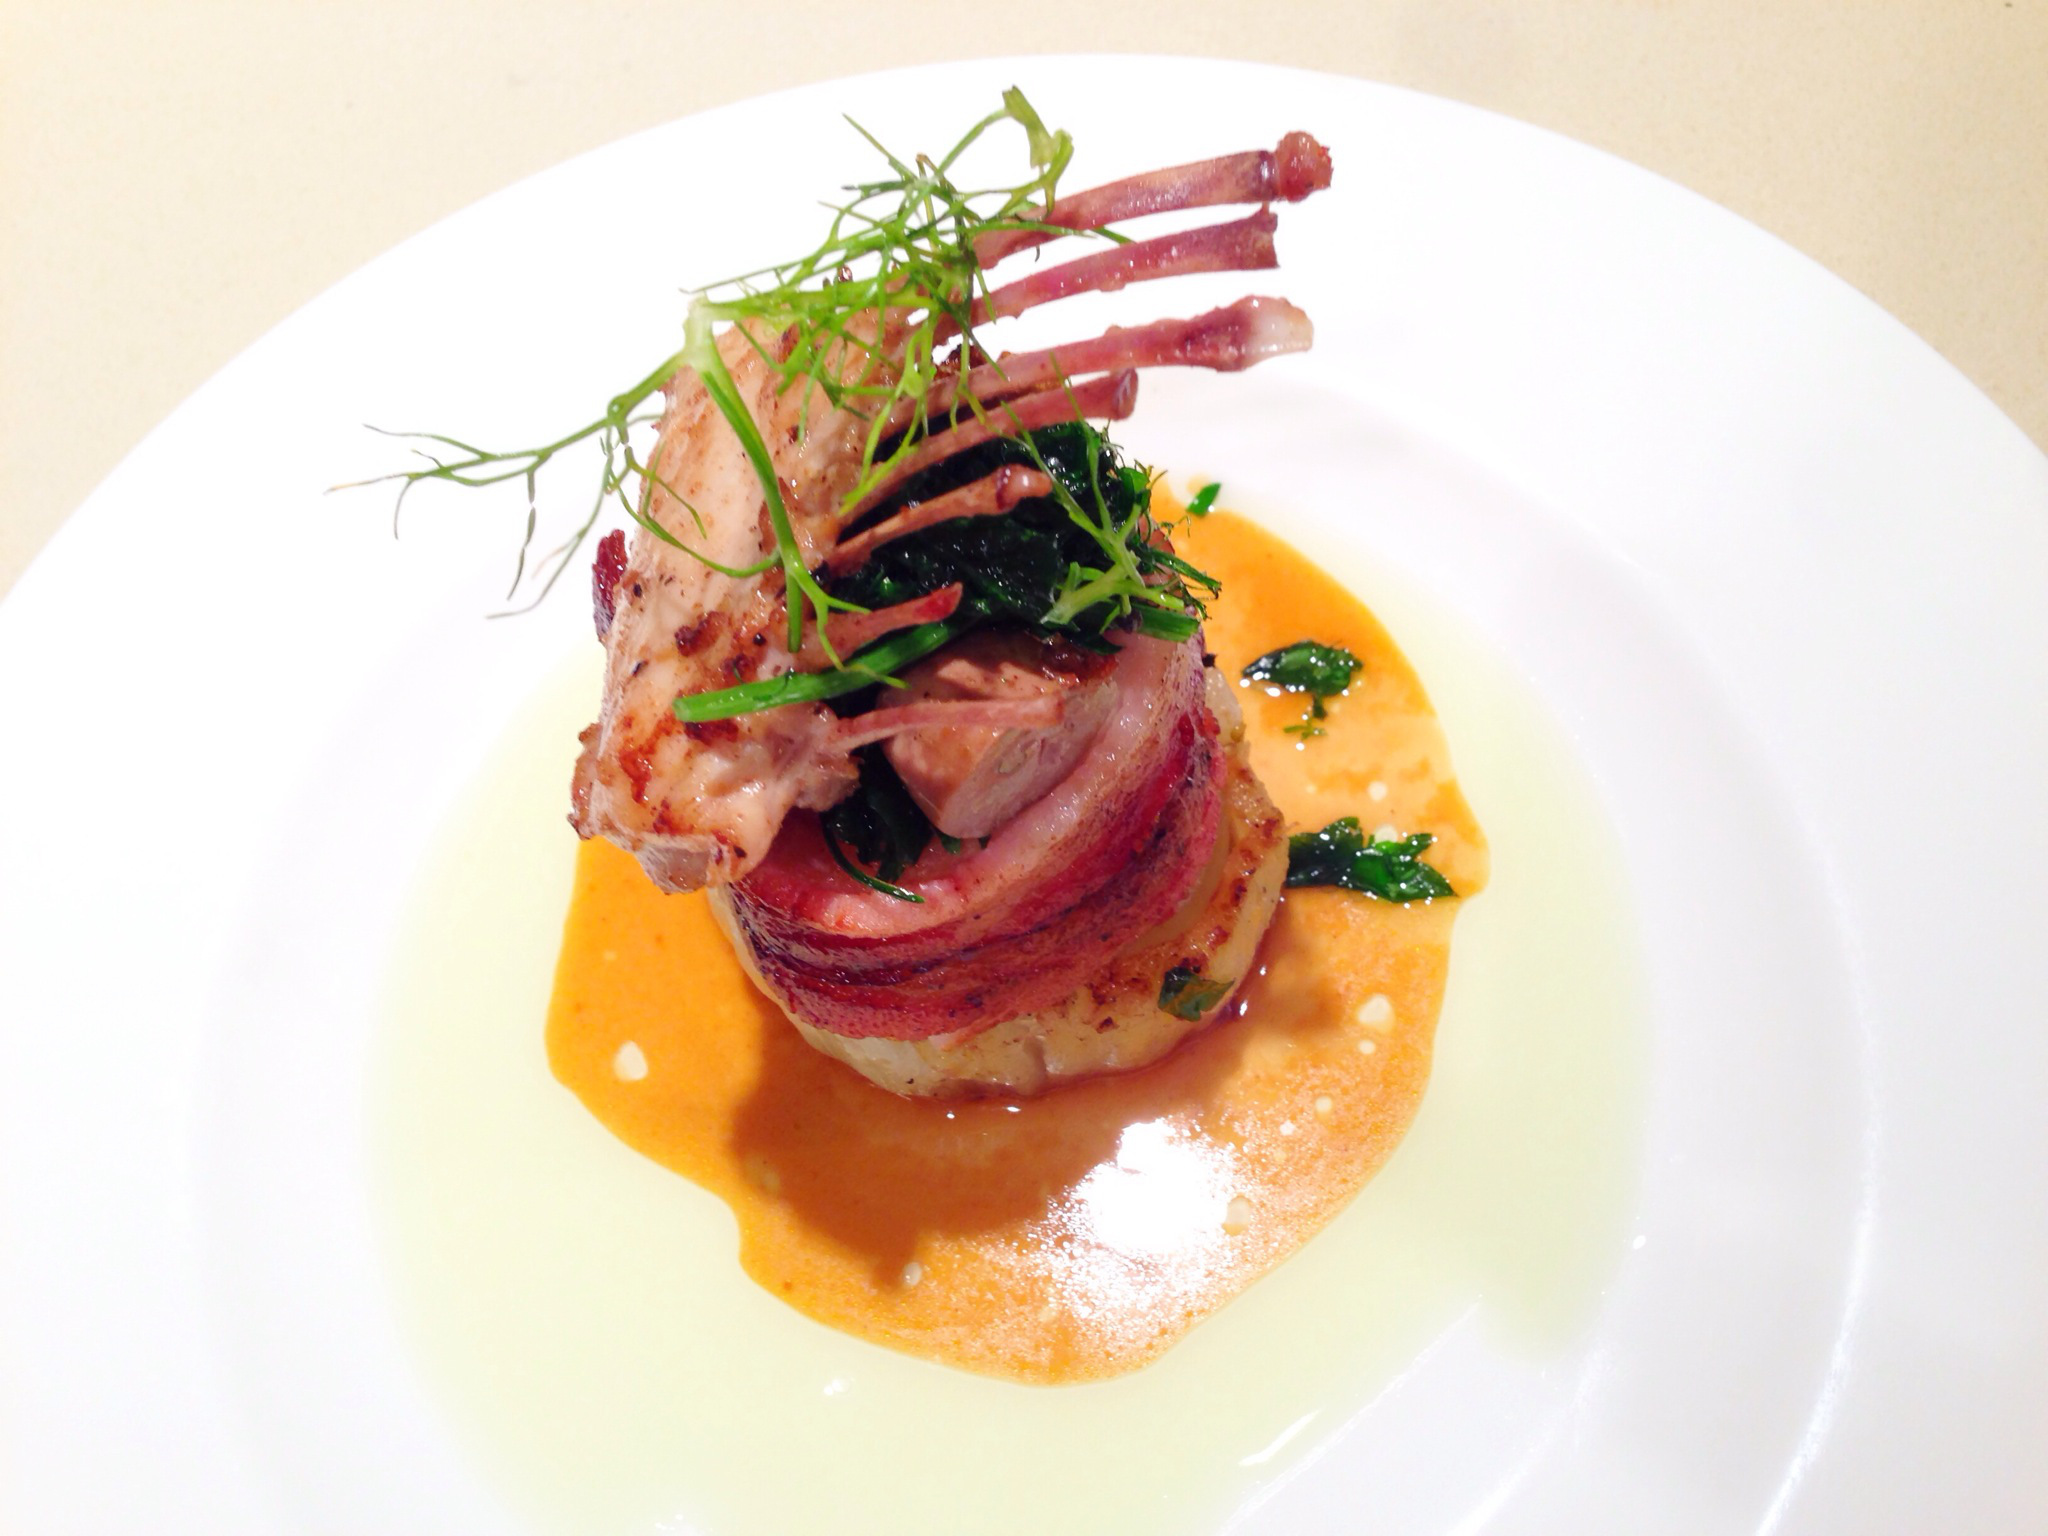 Saddle of Rabbit in Applewood-Smoked Bacon with Caramelized Fennel and Fennel Oil